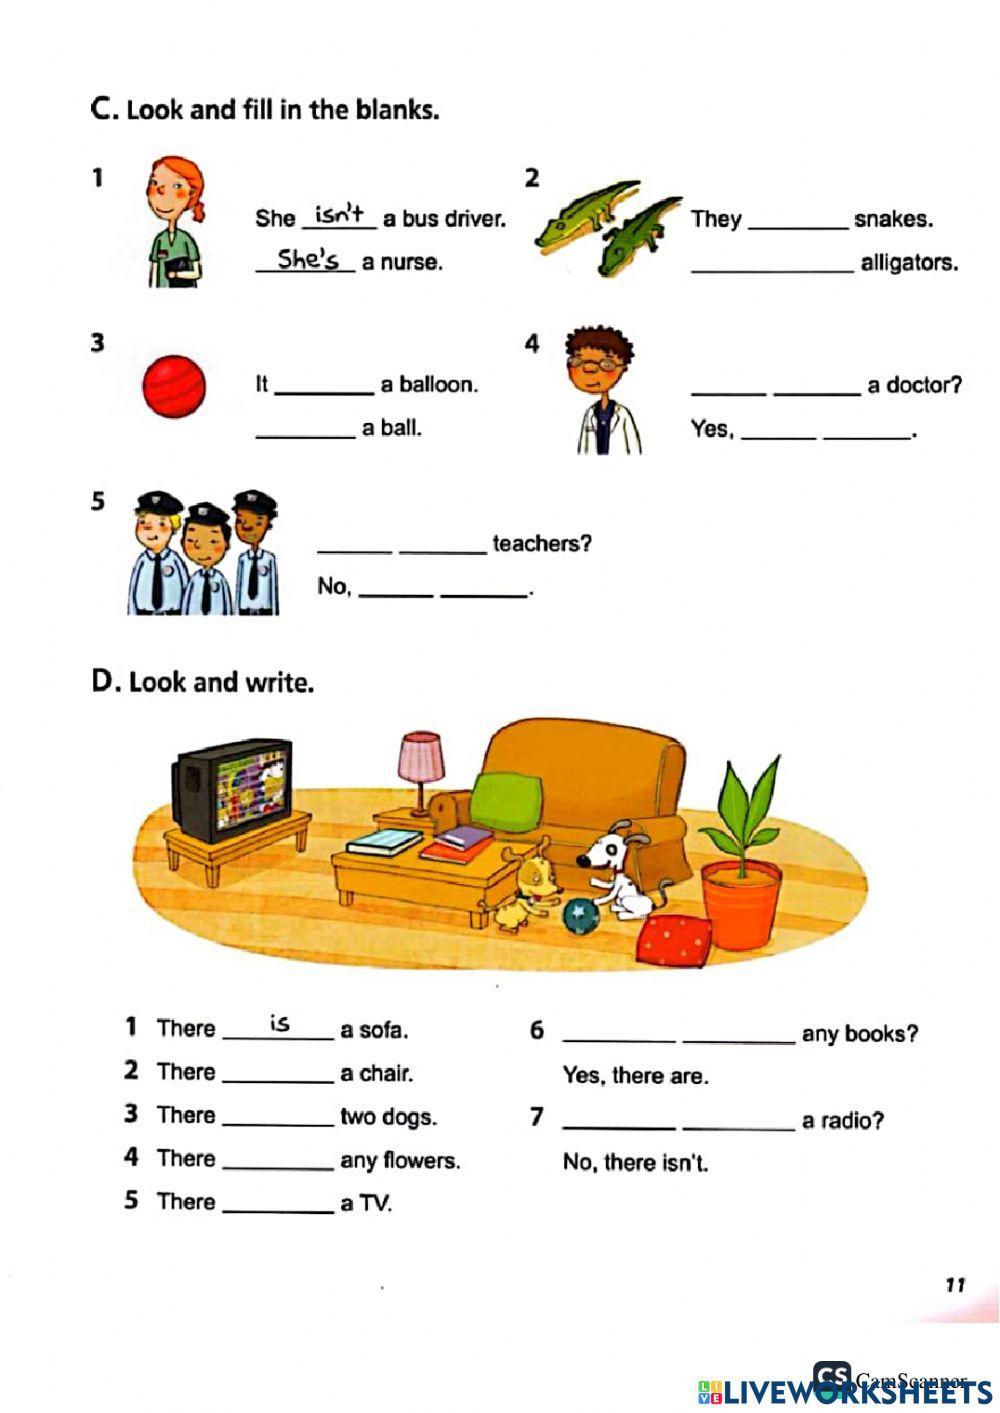 Present simple verb to be